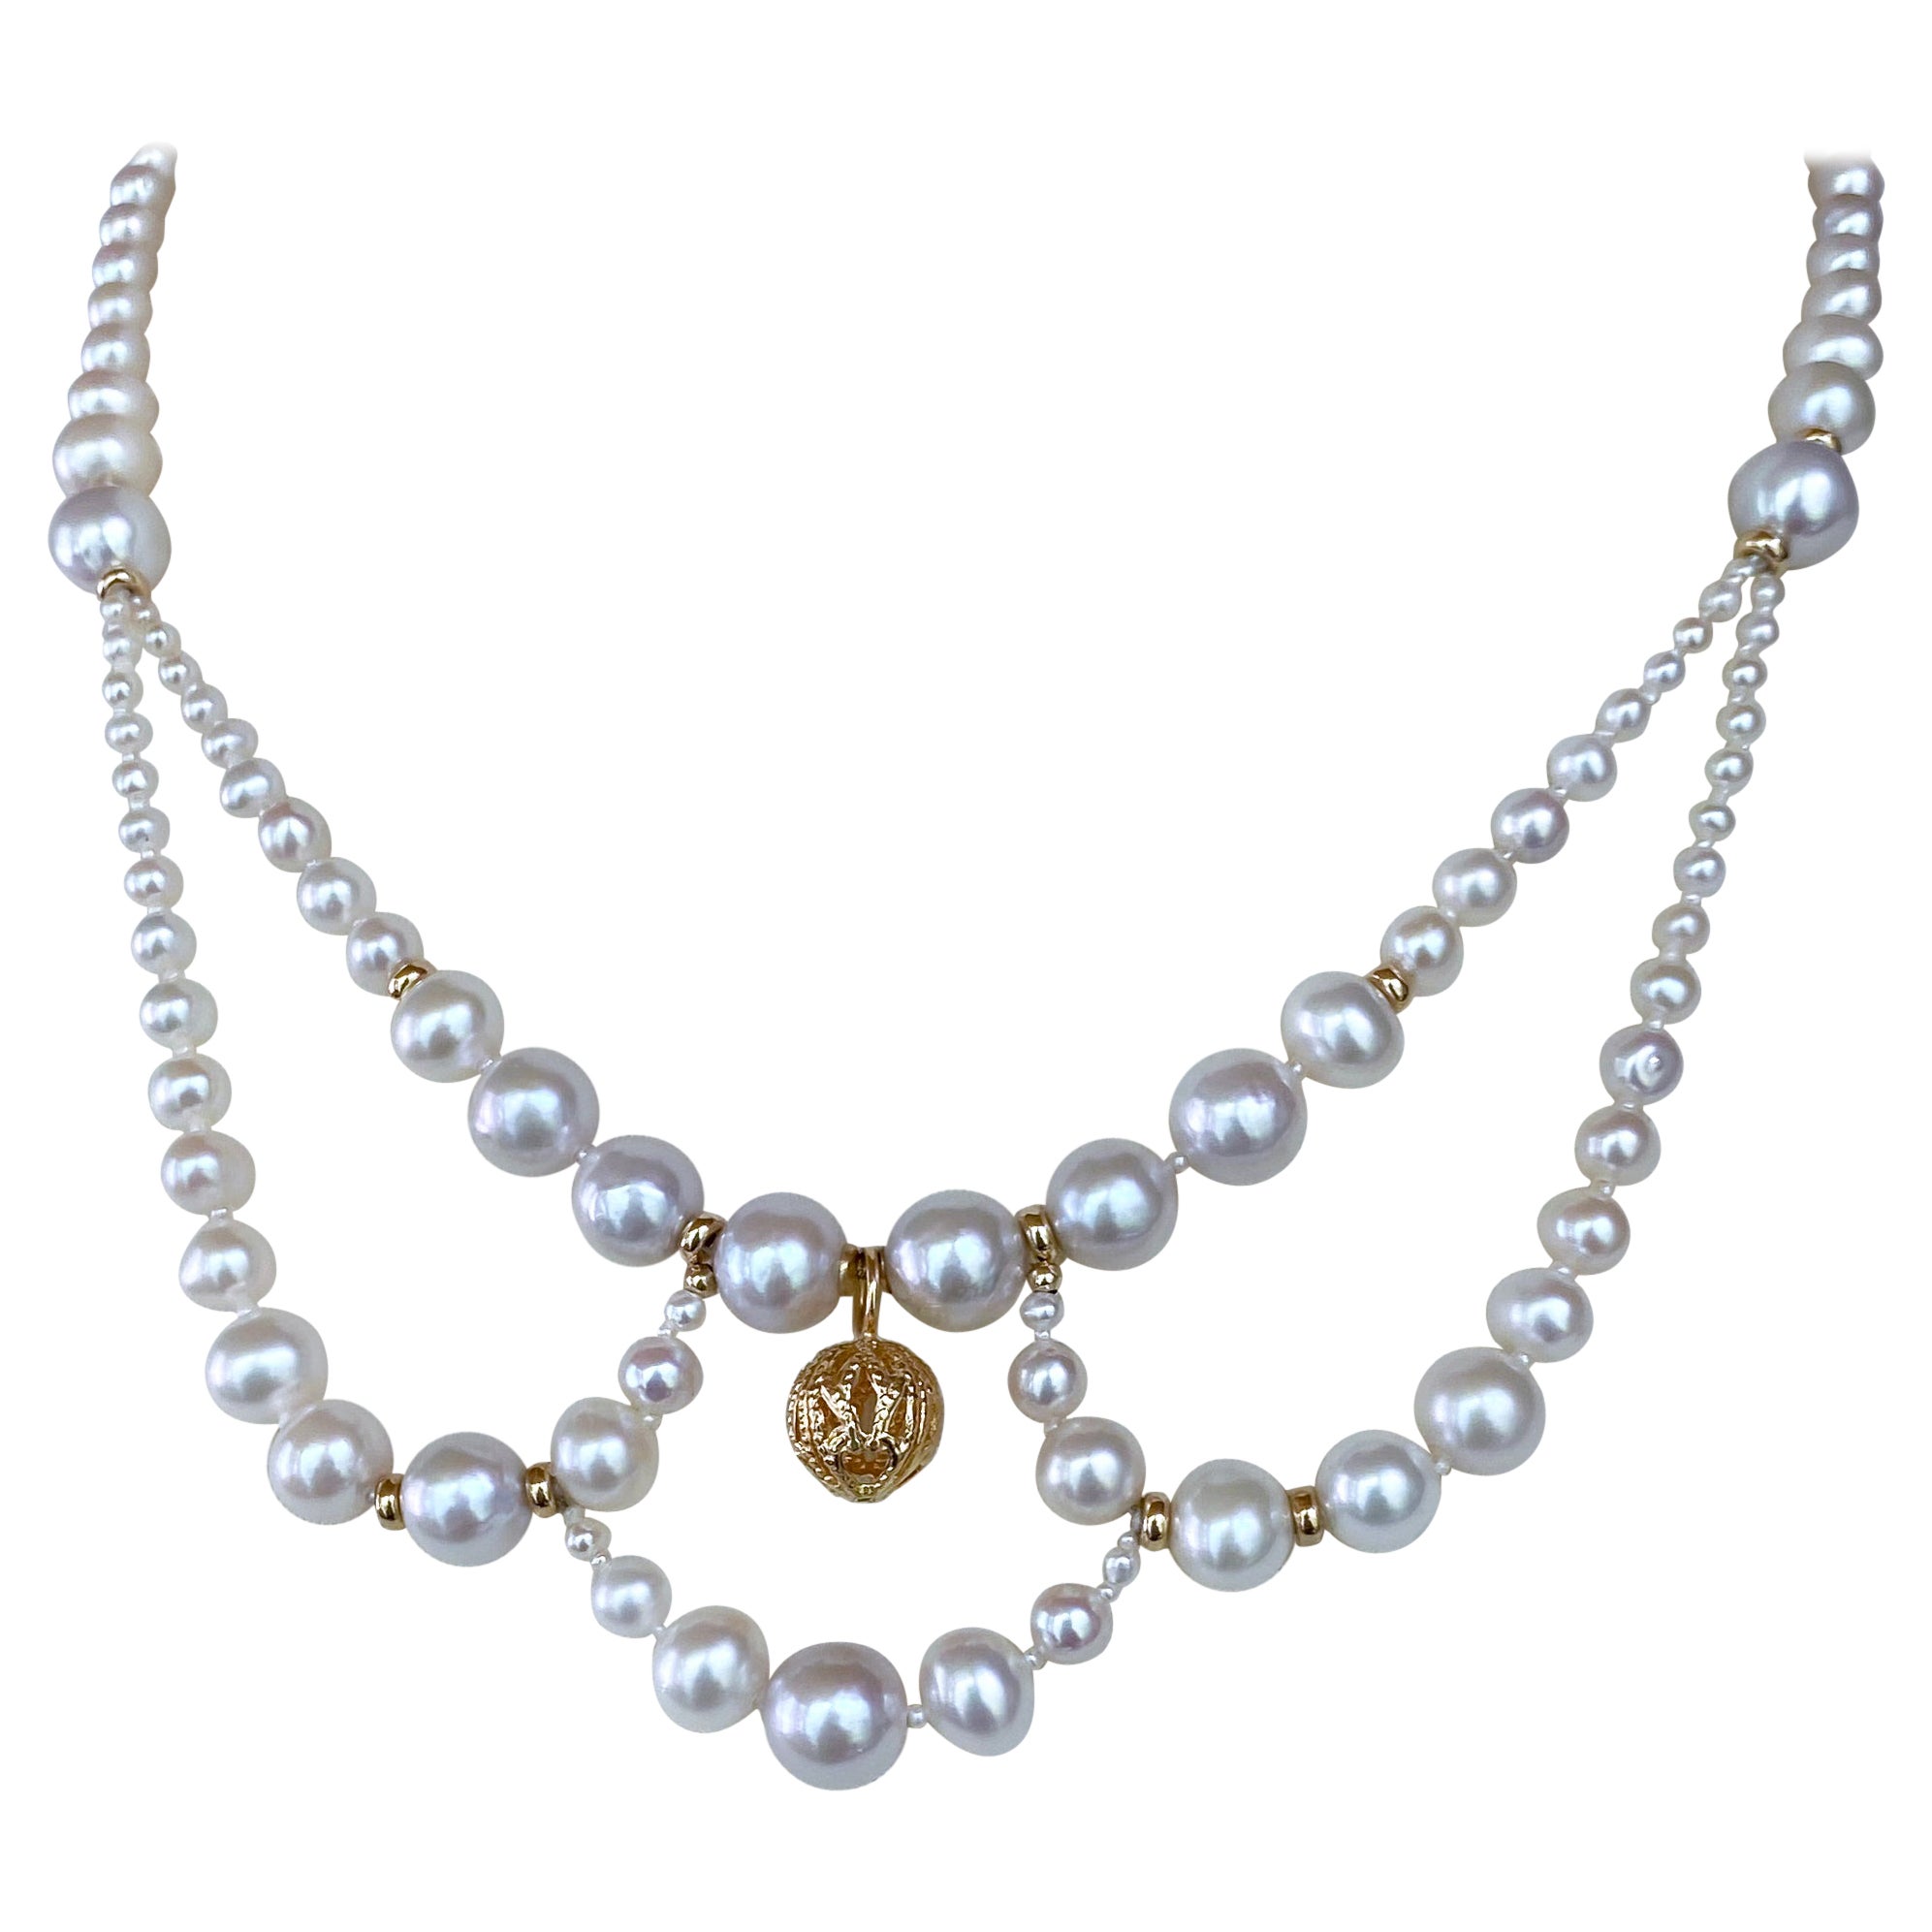 Marina J. Draped Victorian Inspired Pearl & Solid 14k Yellow Gold Necklace For Sale